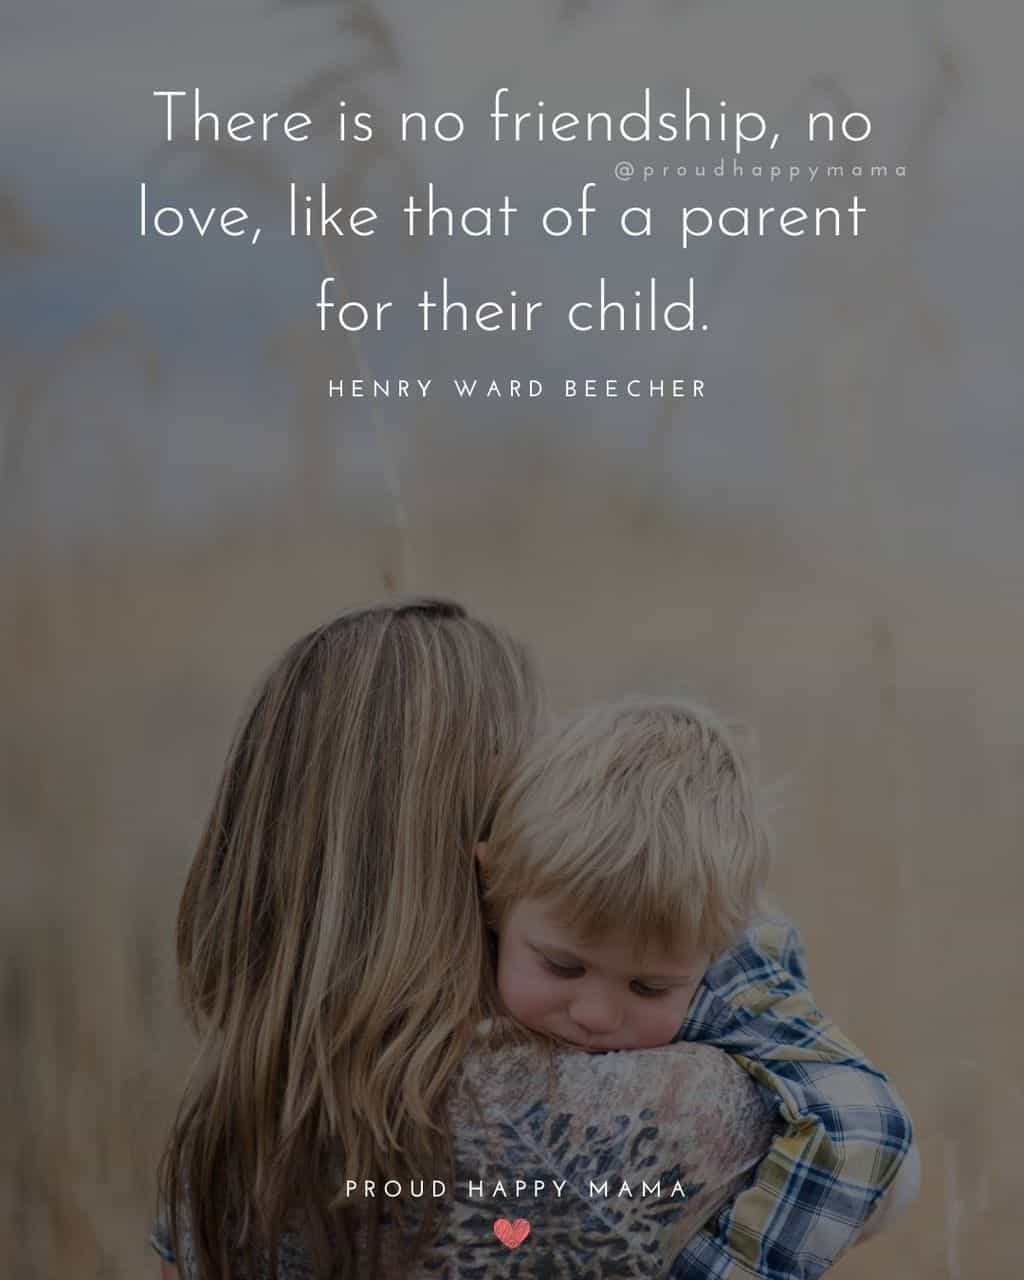 Parenting Quotes - There is no friendship, no love, like that of a parent for their child.’ – Henry Ward Beecher